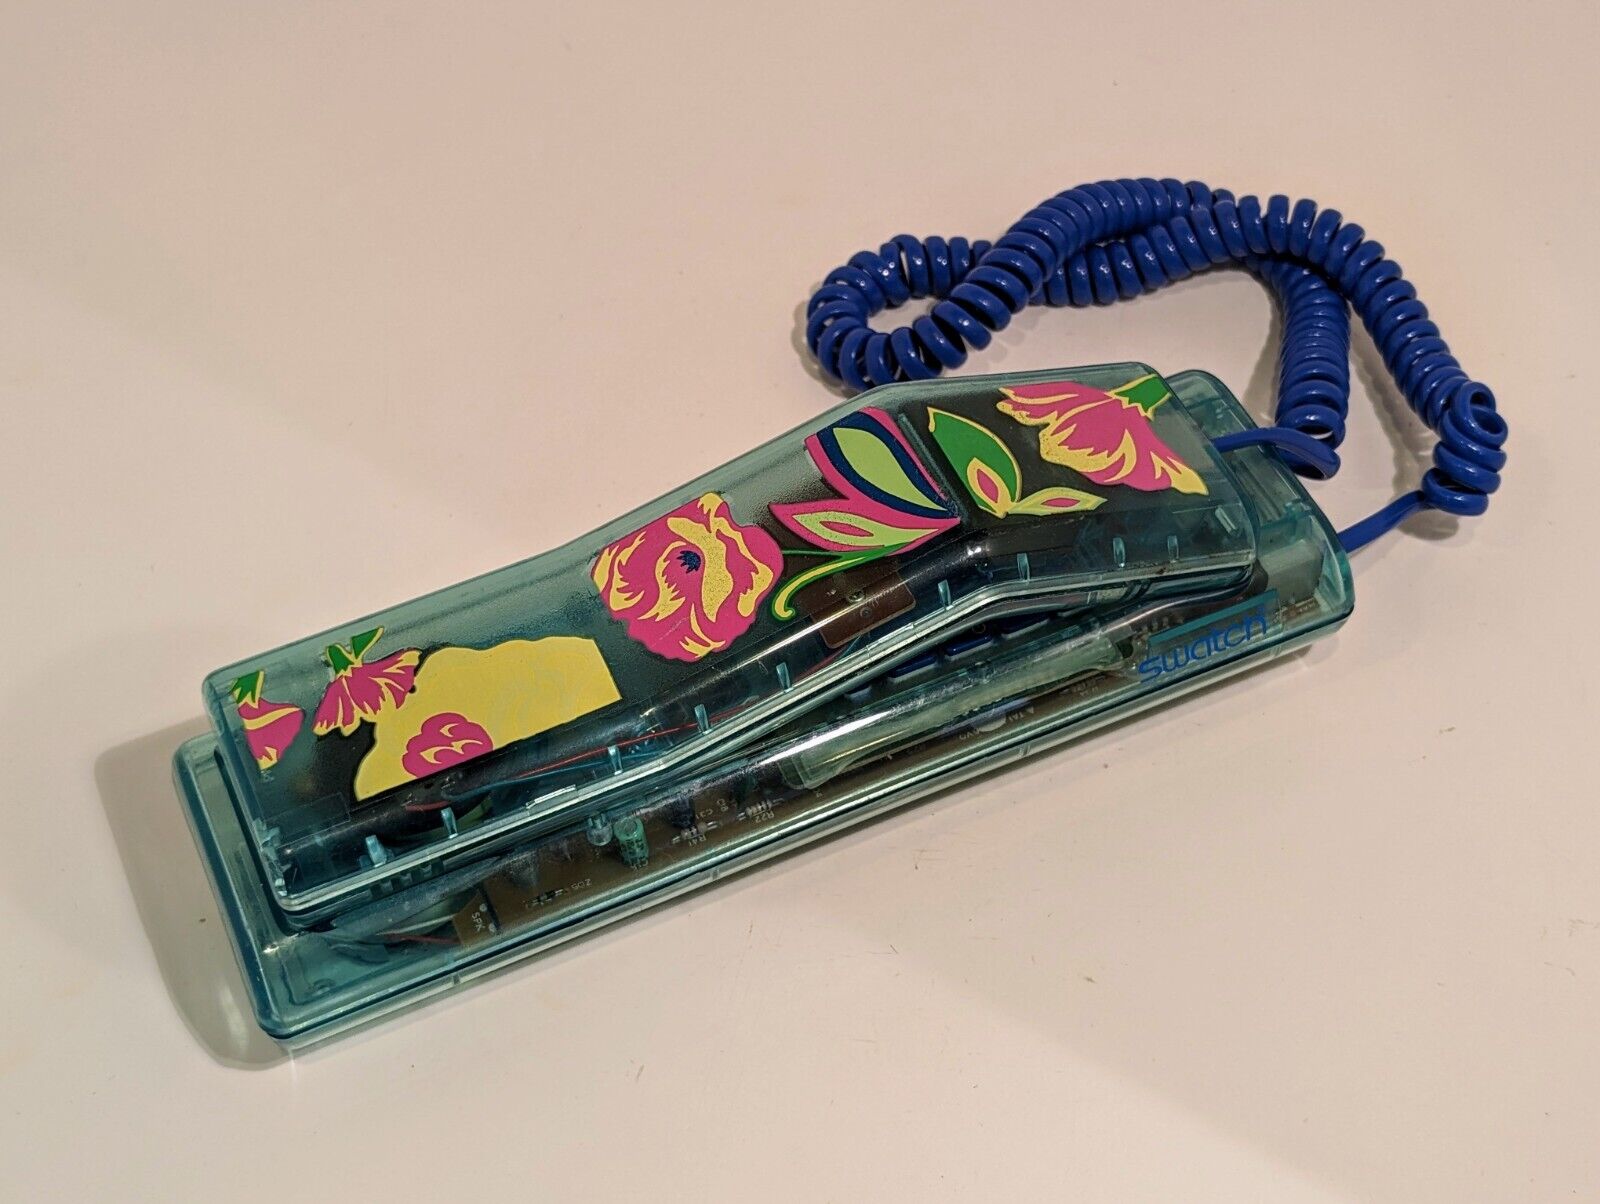 Vintage 80s Swatch Twin Phone - Clear Blue-green & Floral - Untested